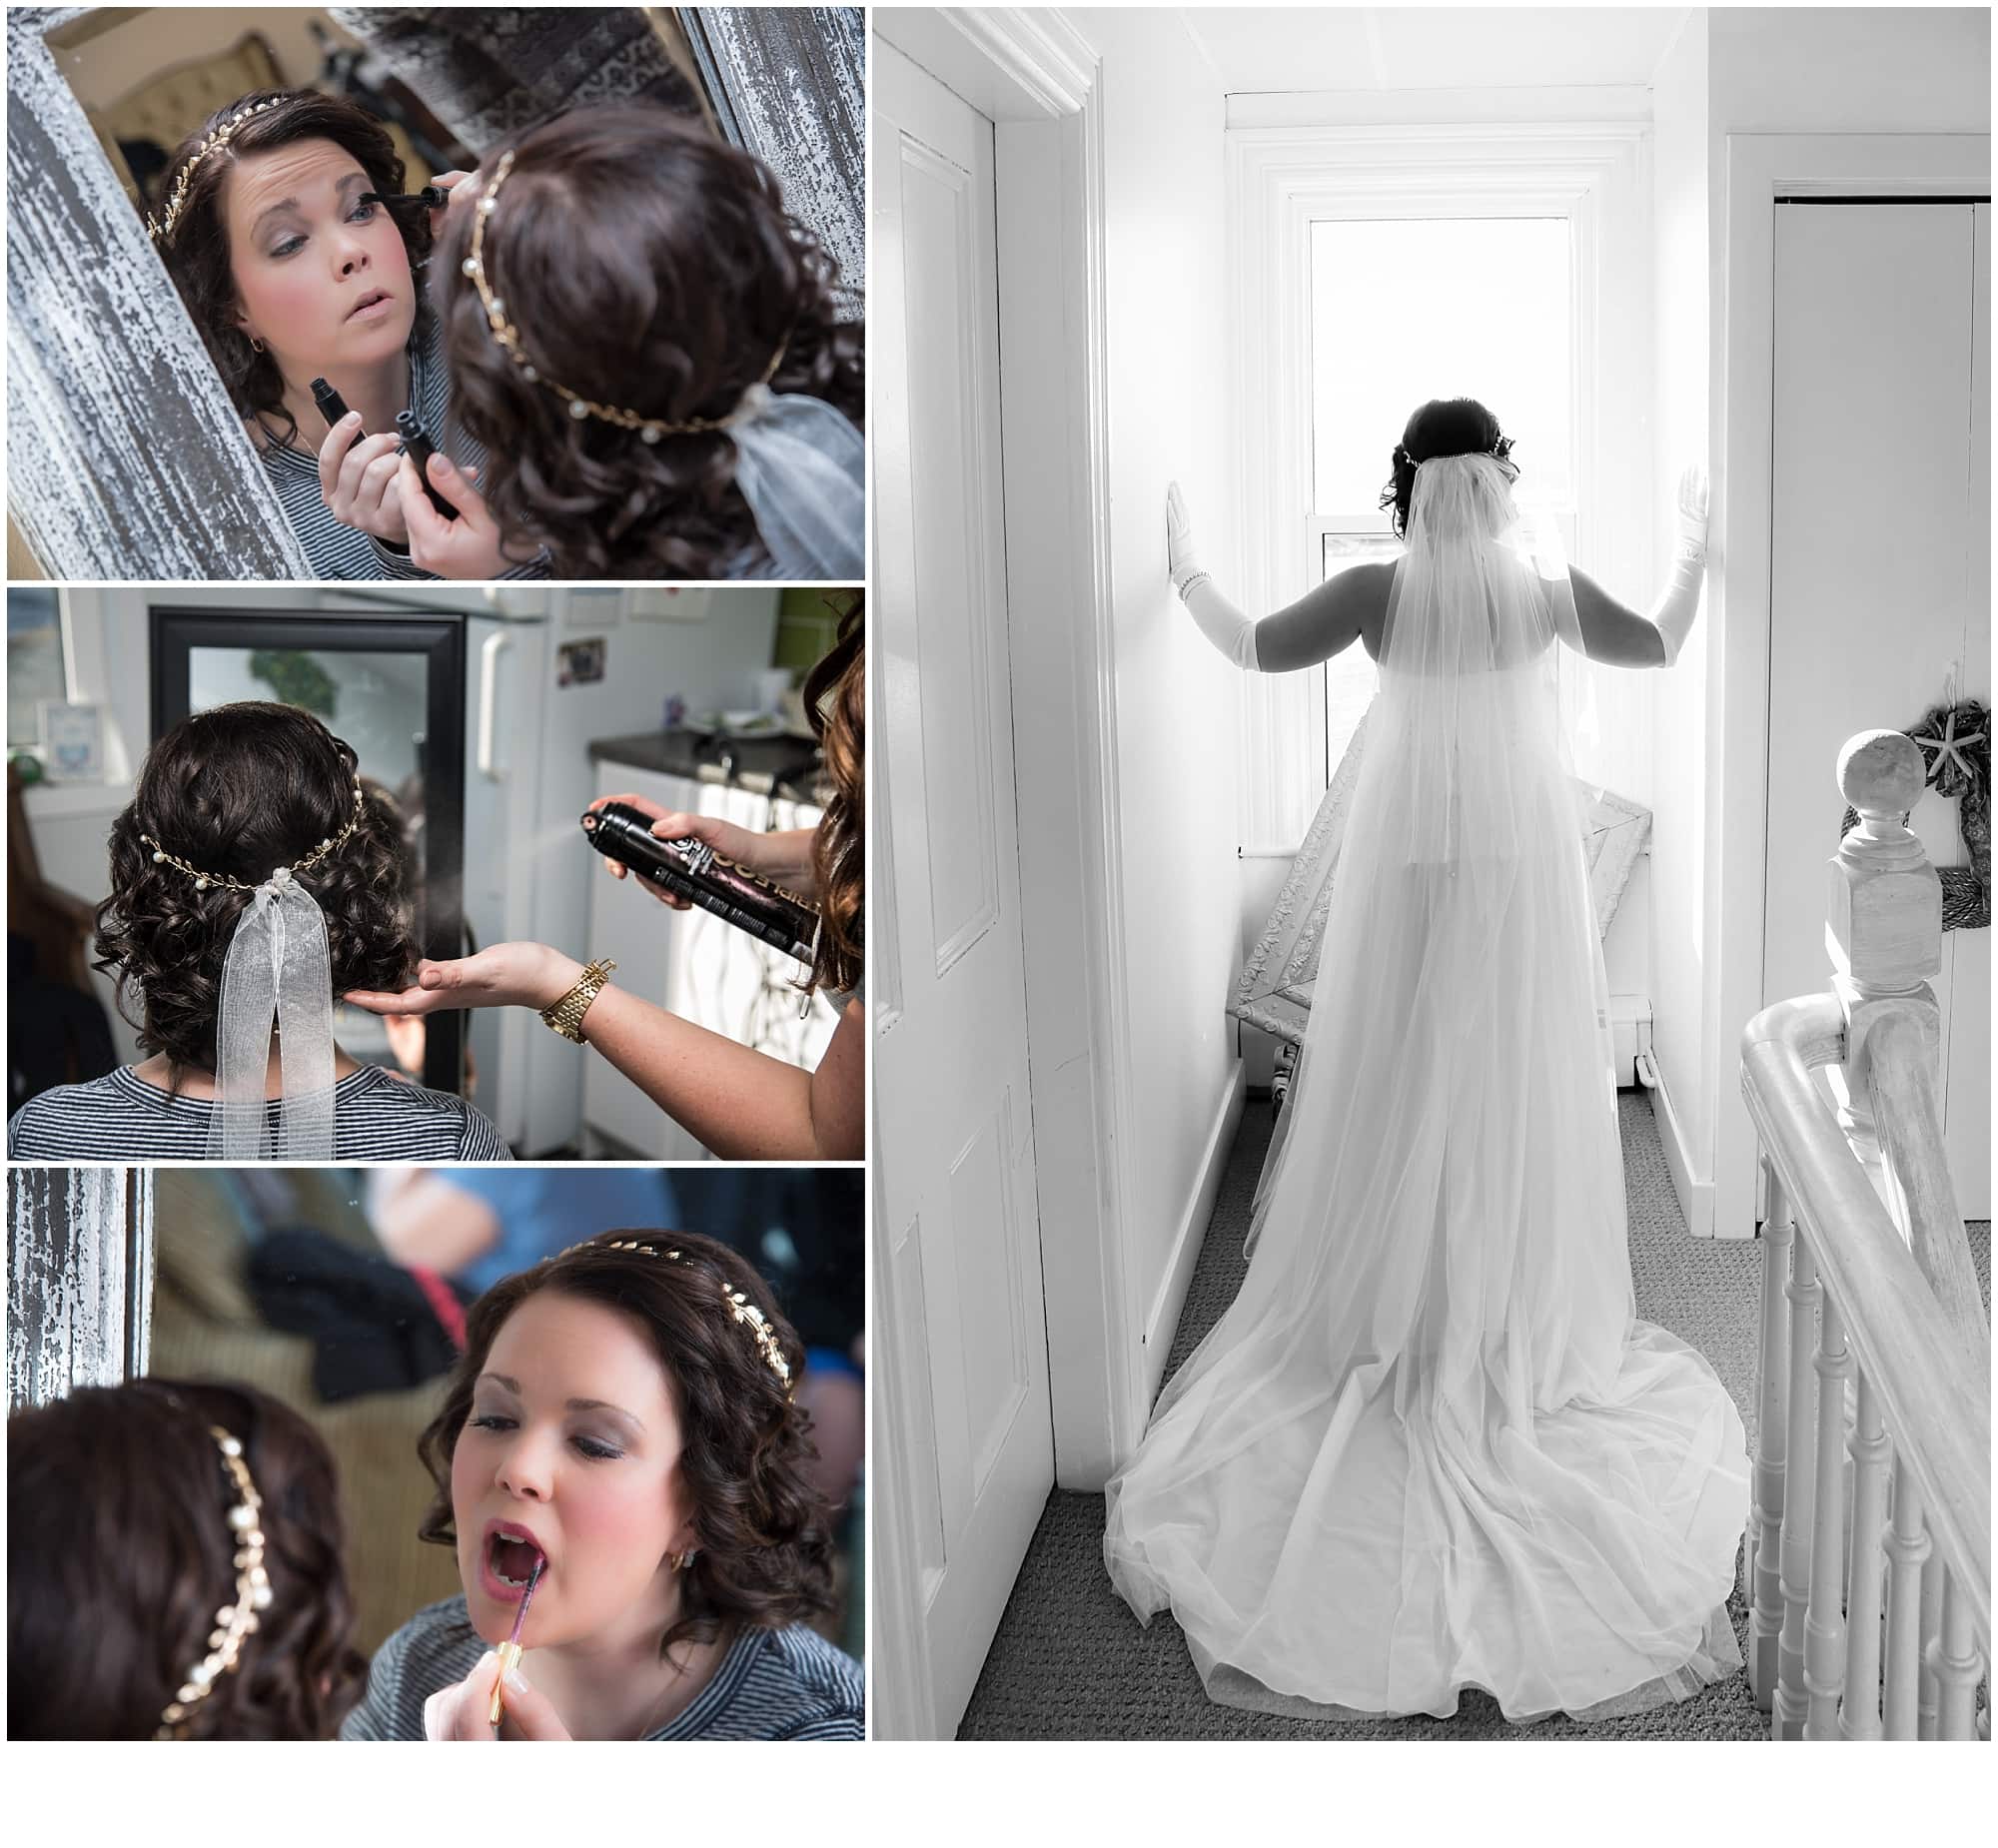 The bride getting ready during bridal prep putting her bridal makeup on and having her hair styled.